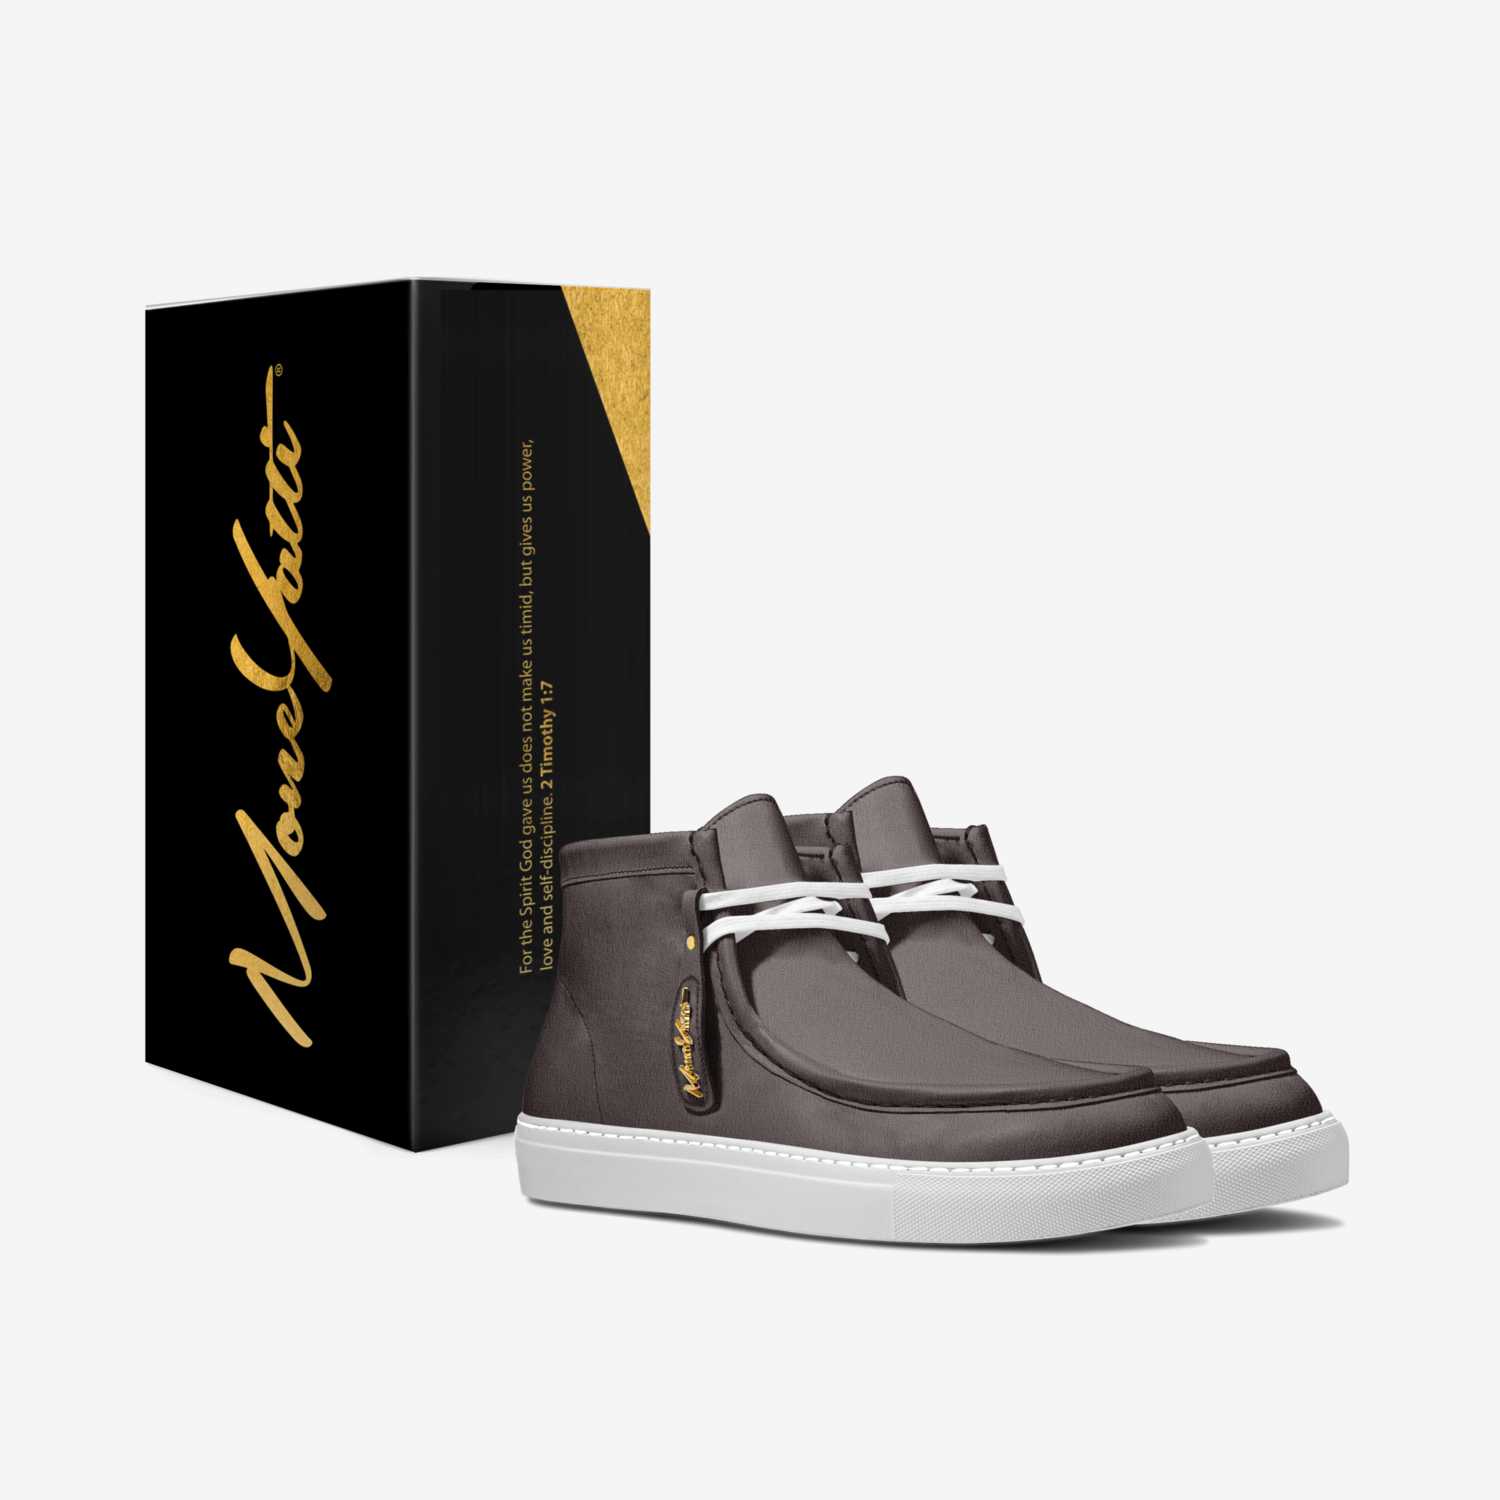 LUX SUEDE 008 custom made in Italy shoes by Moneyatti Brand | Box view